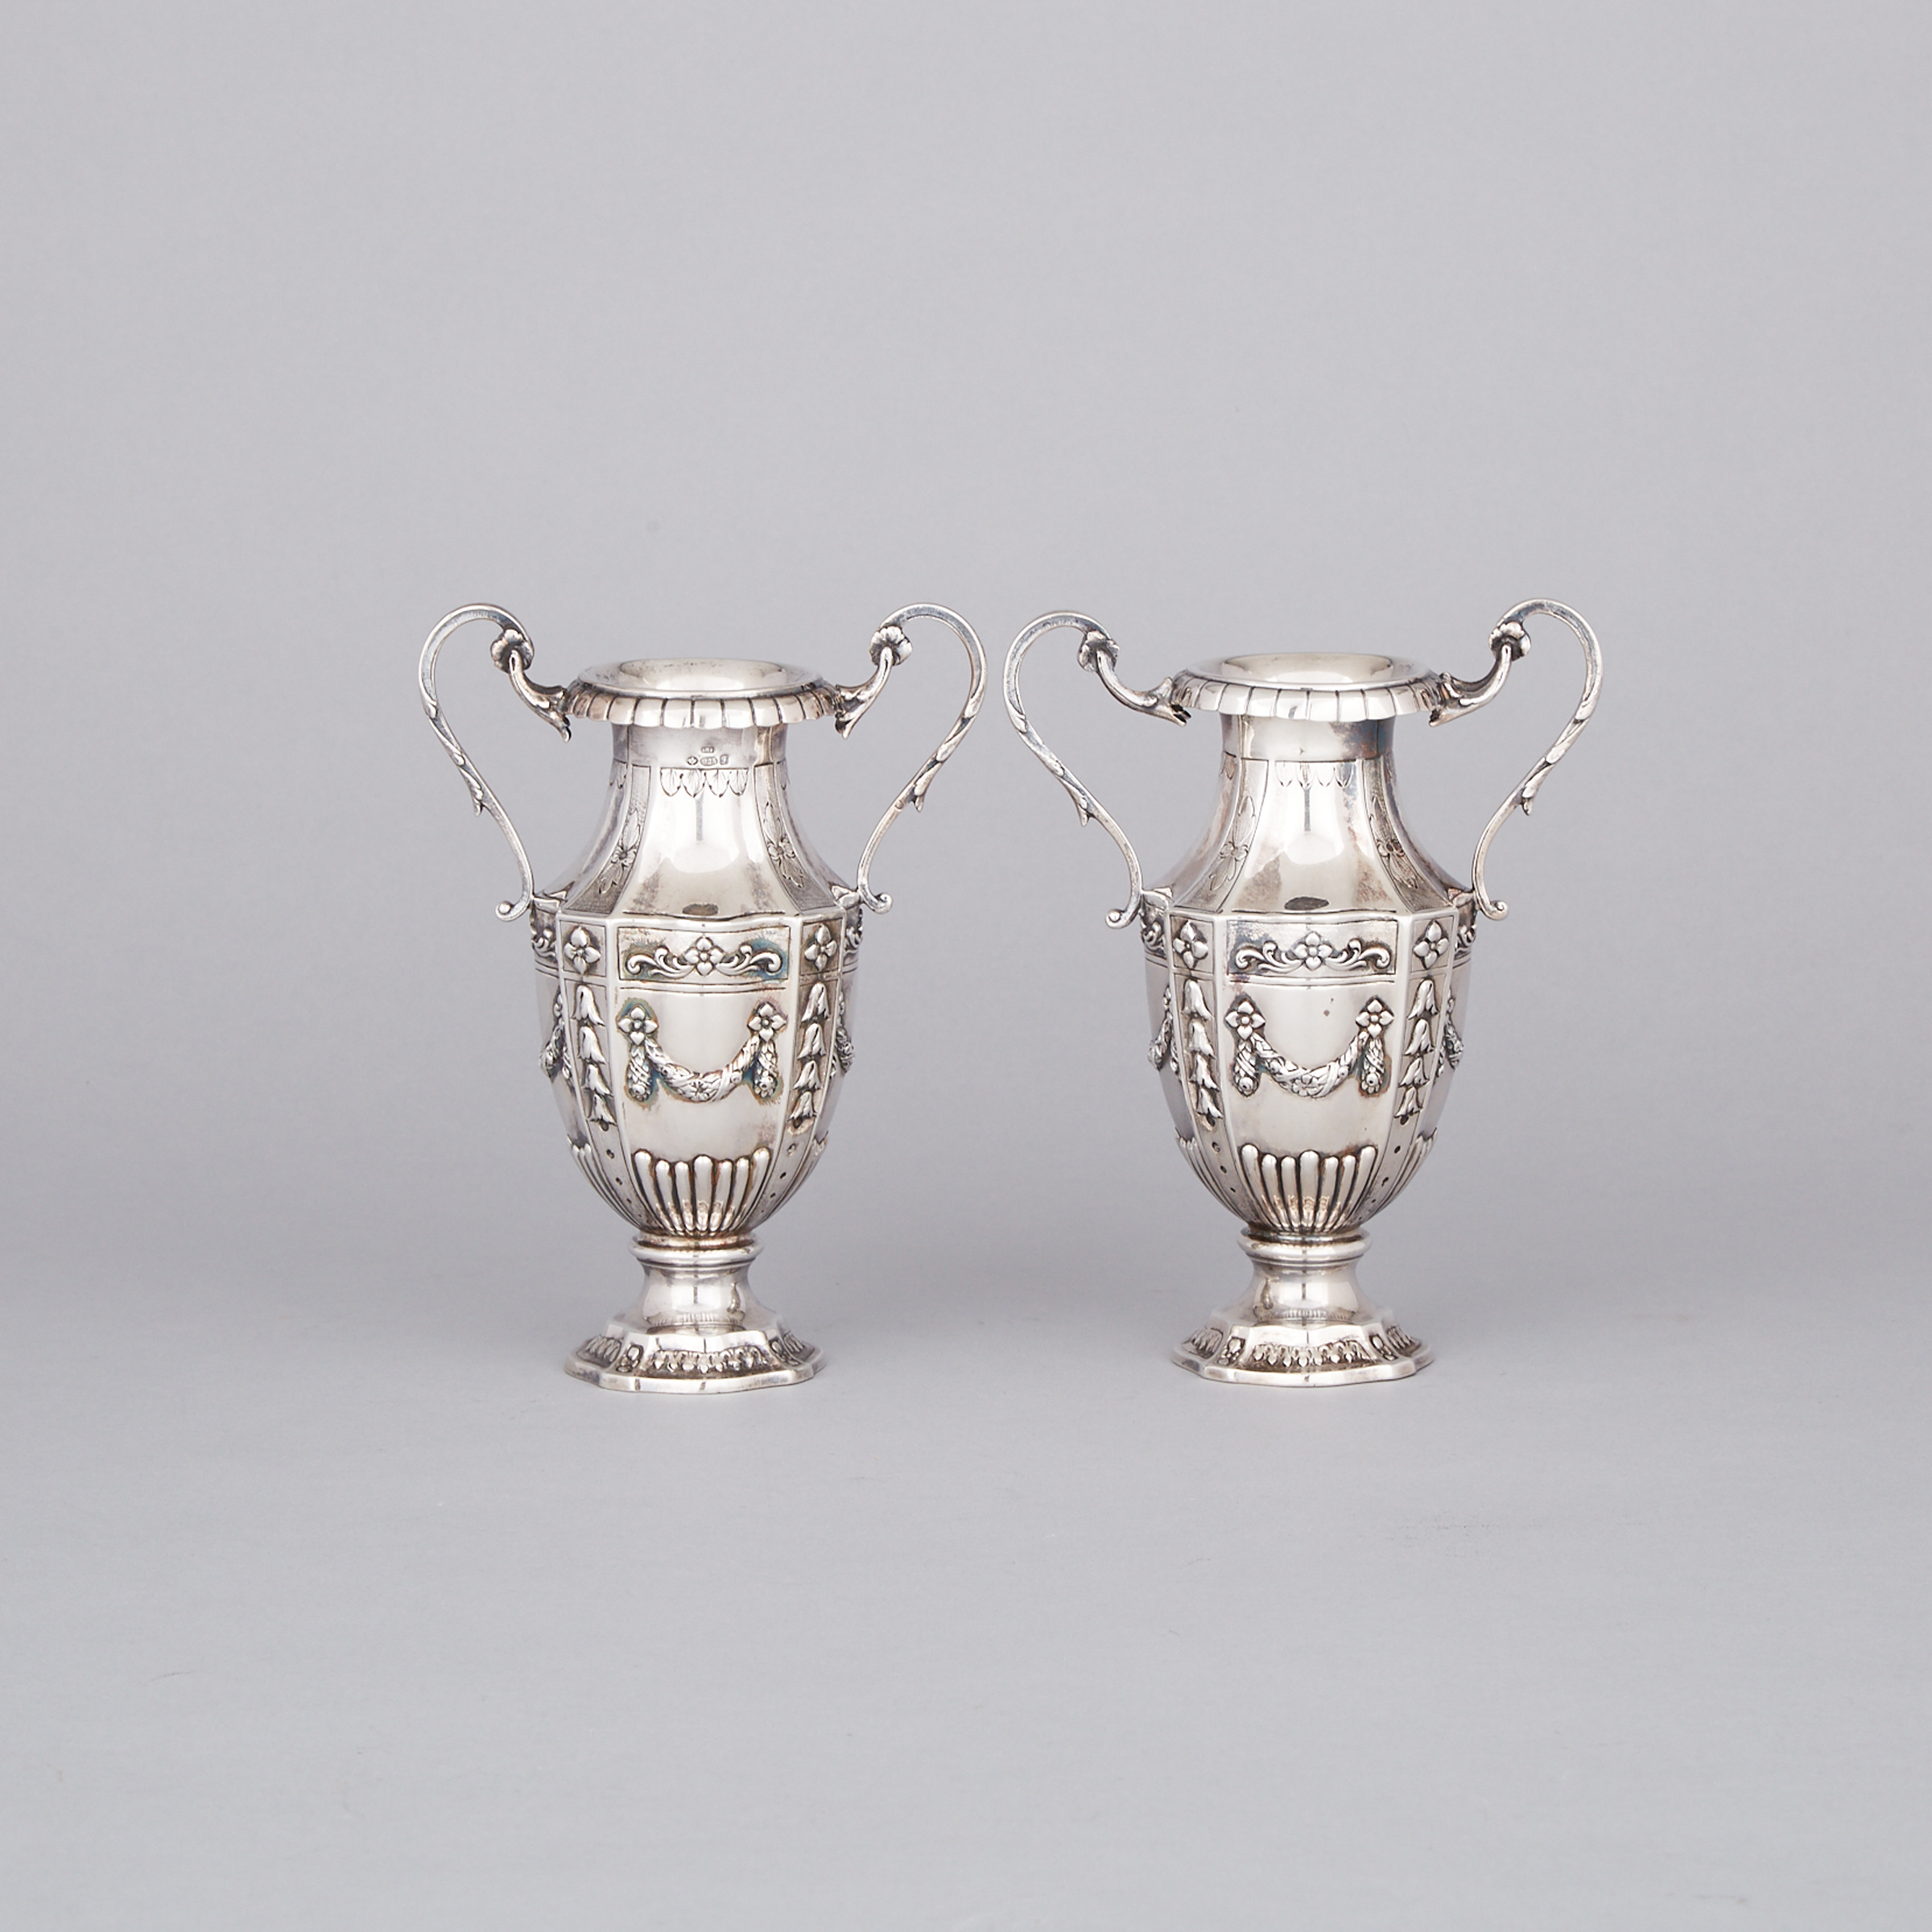 Pair of German Silver Two-Handled Vases, probably Hanau, early 20th century